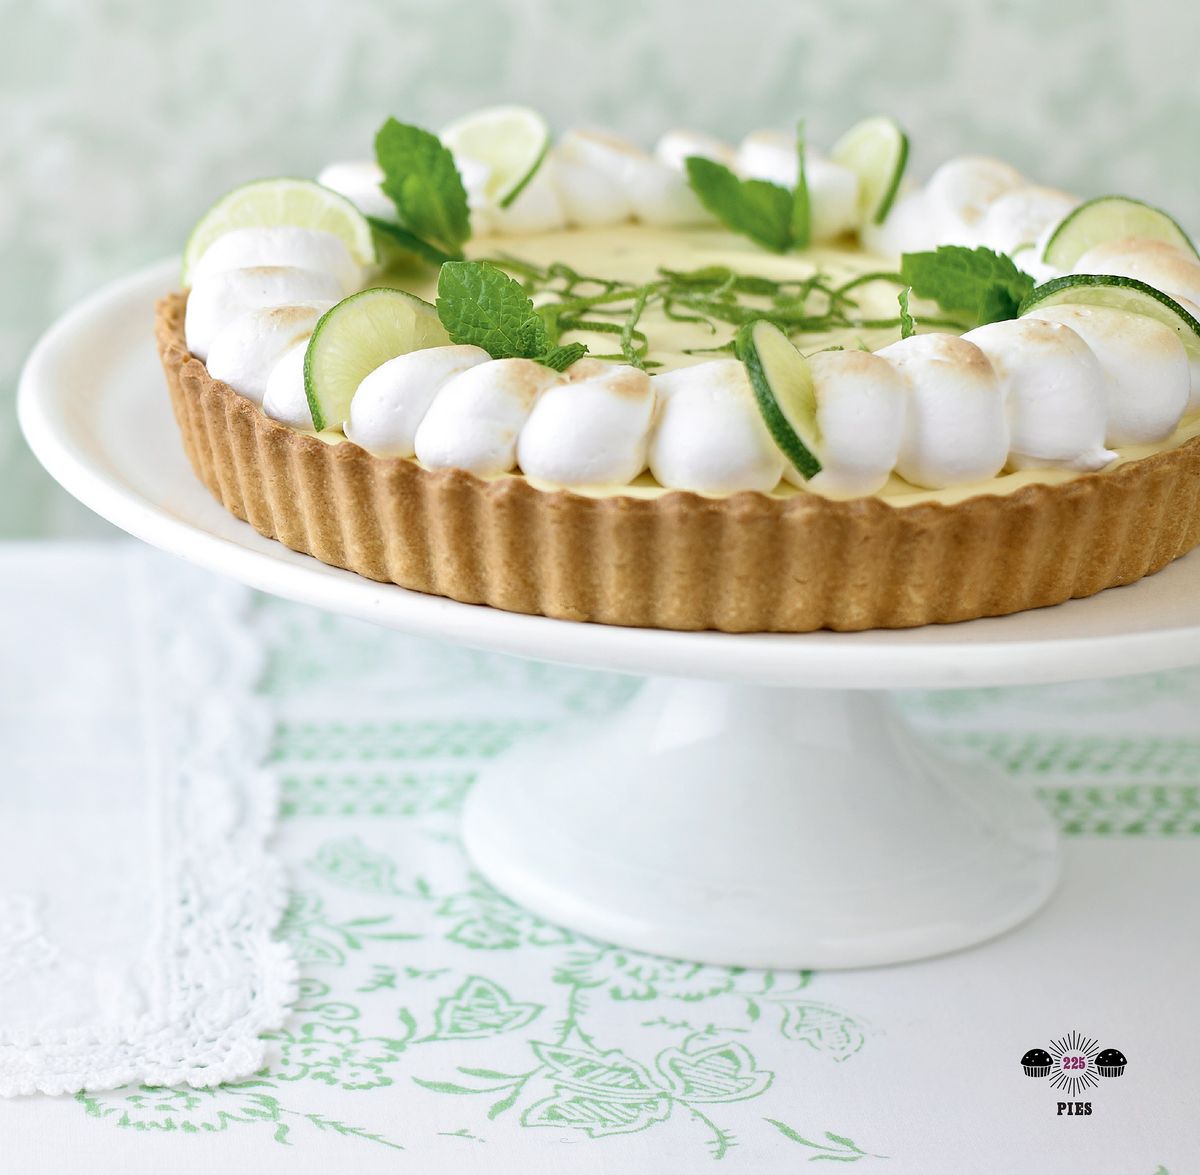 American Lime Pie